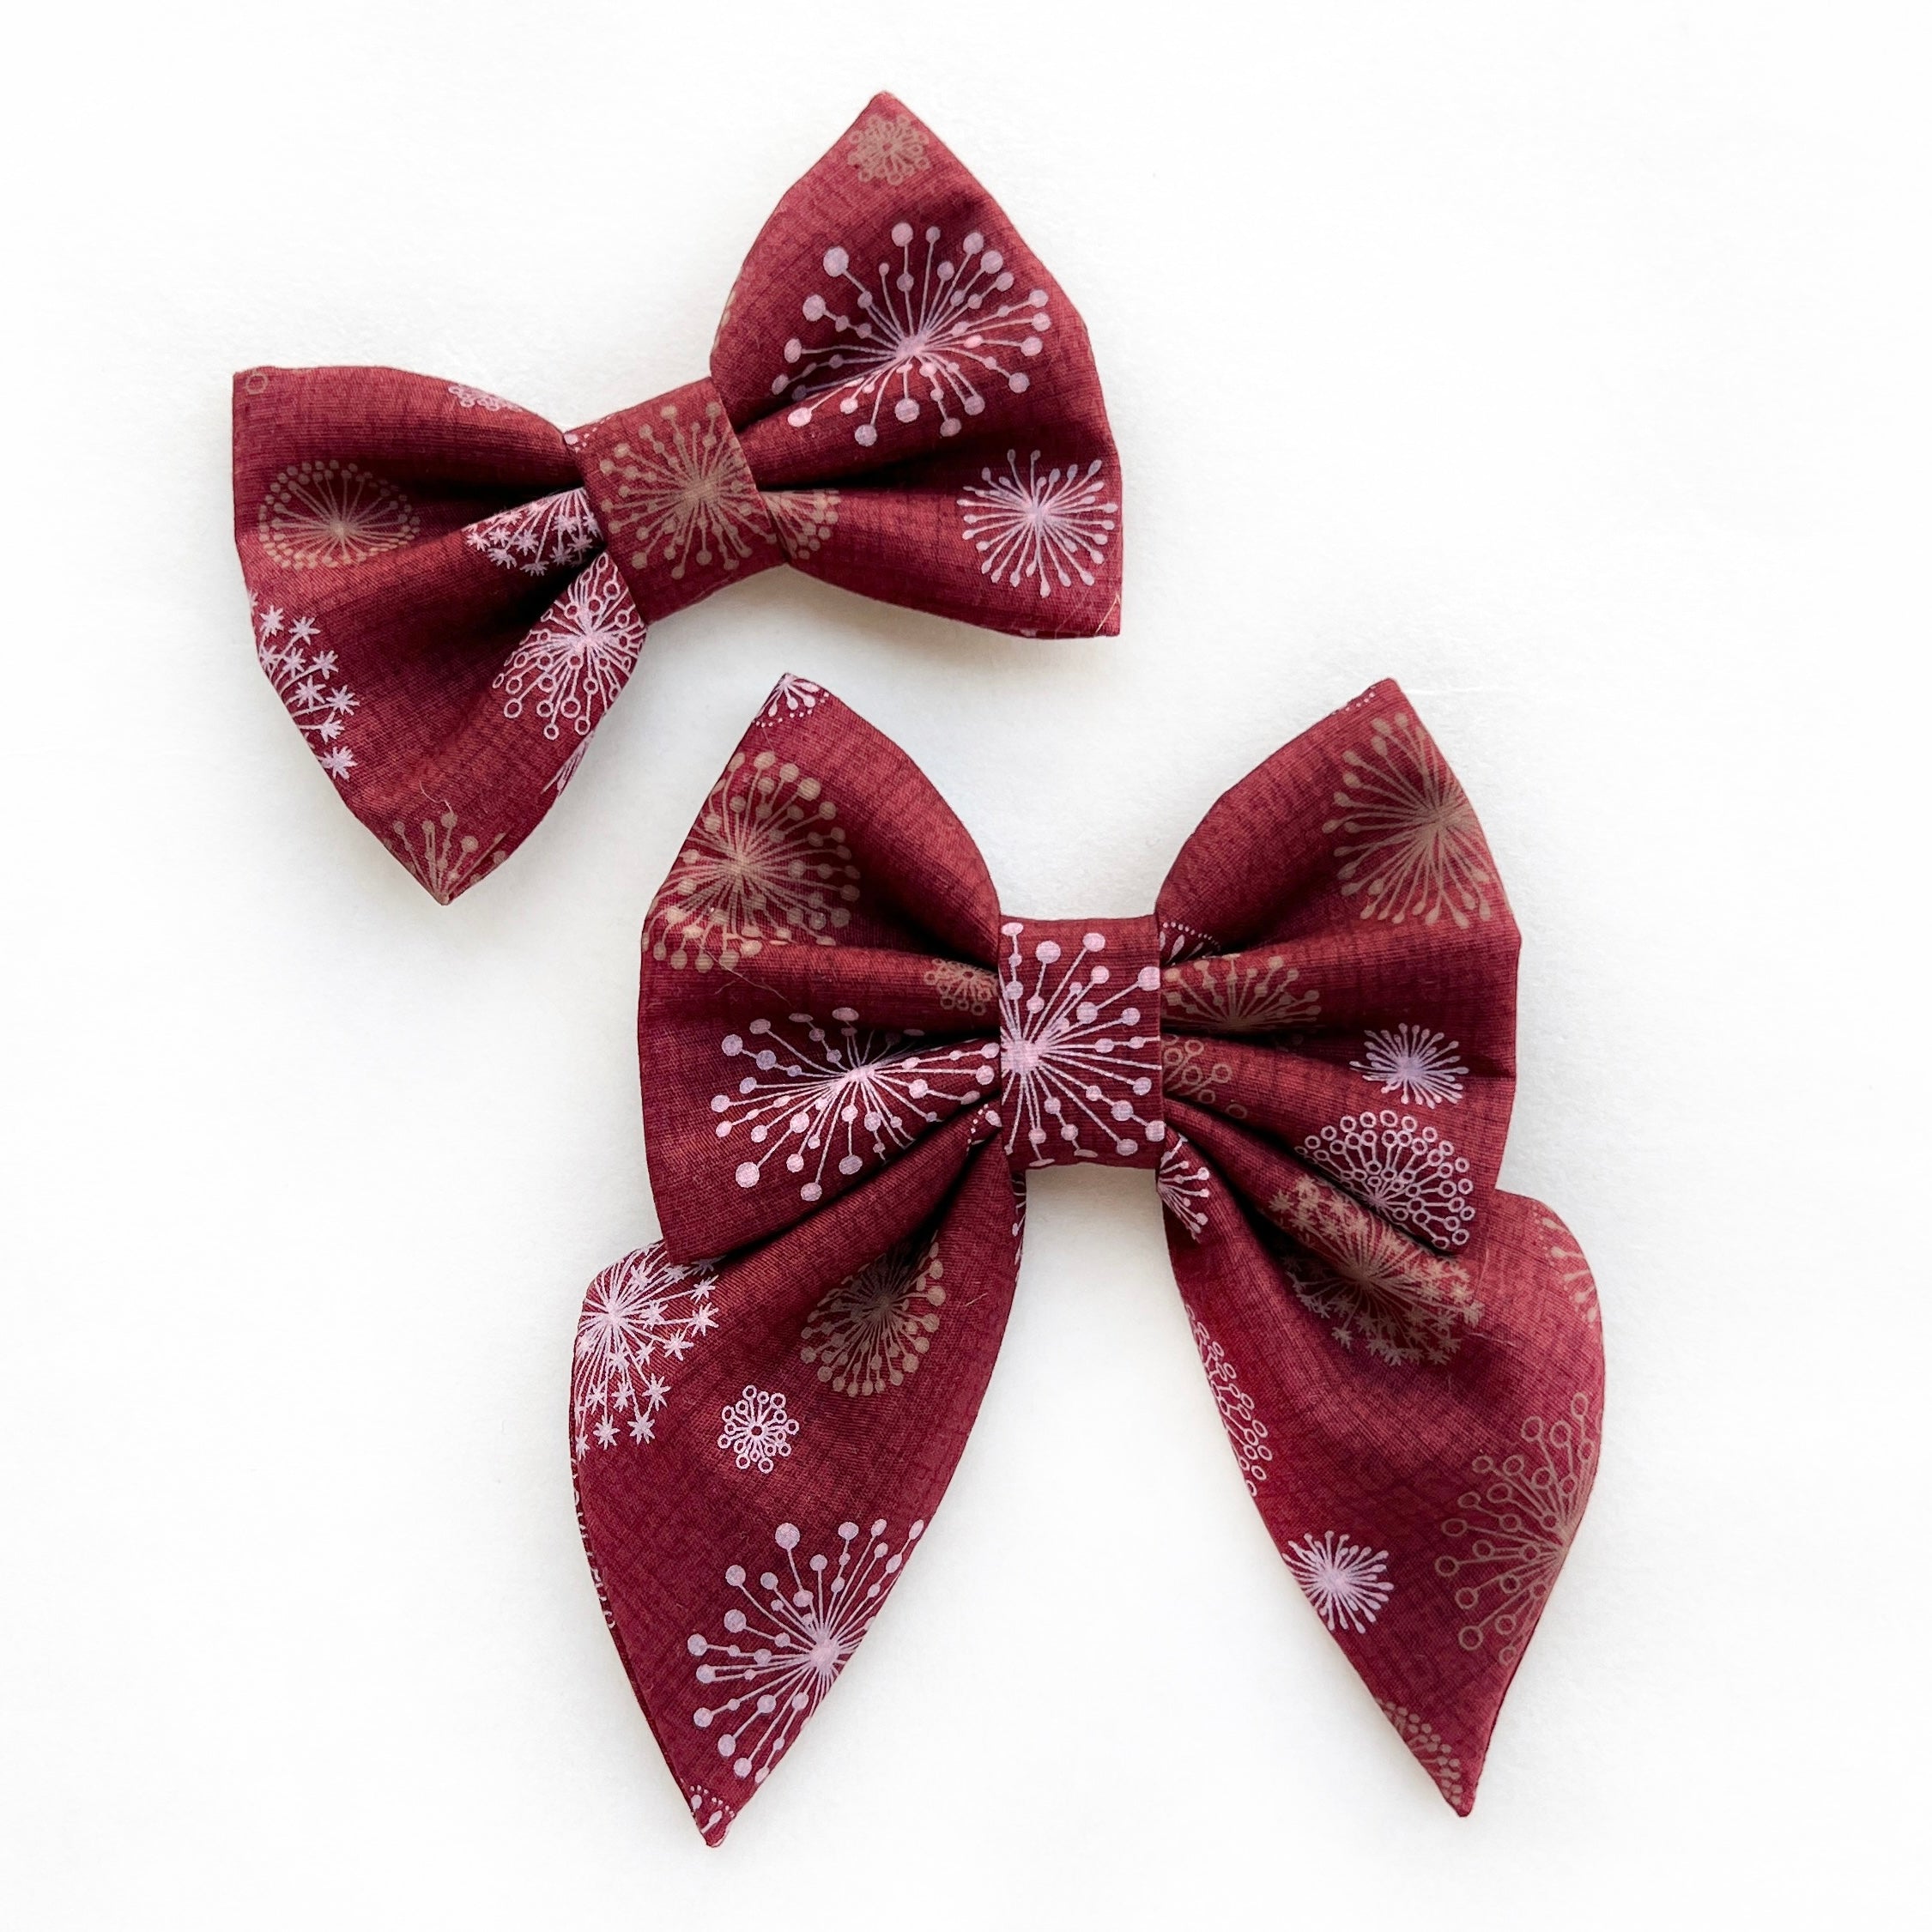 FIREWORKS - Sailor Bow Large (short version) // READY TO SHIP